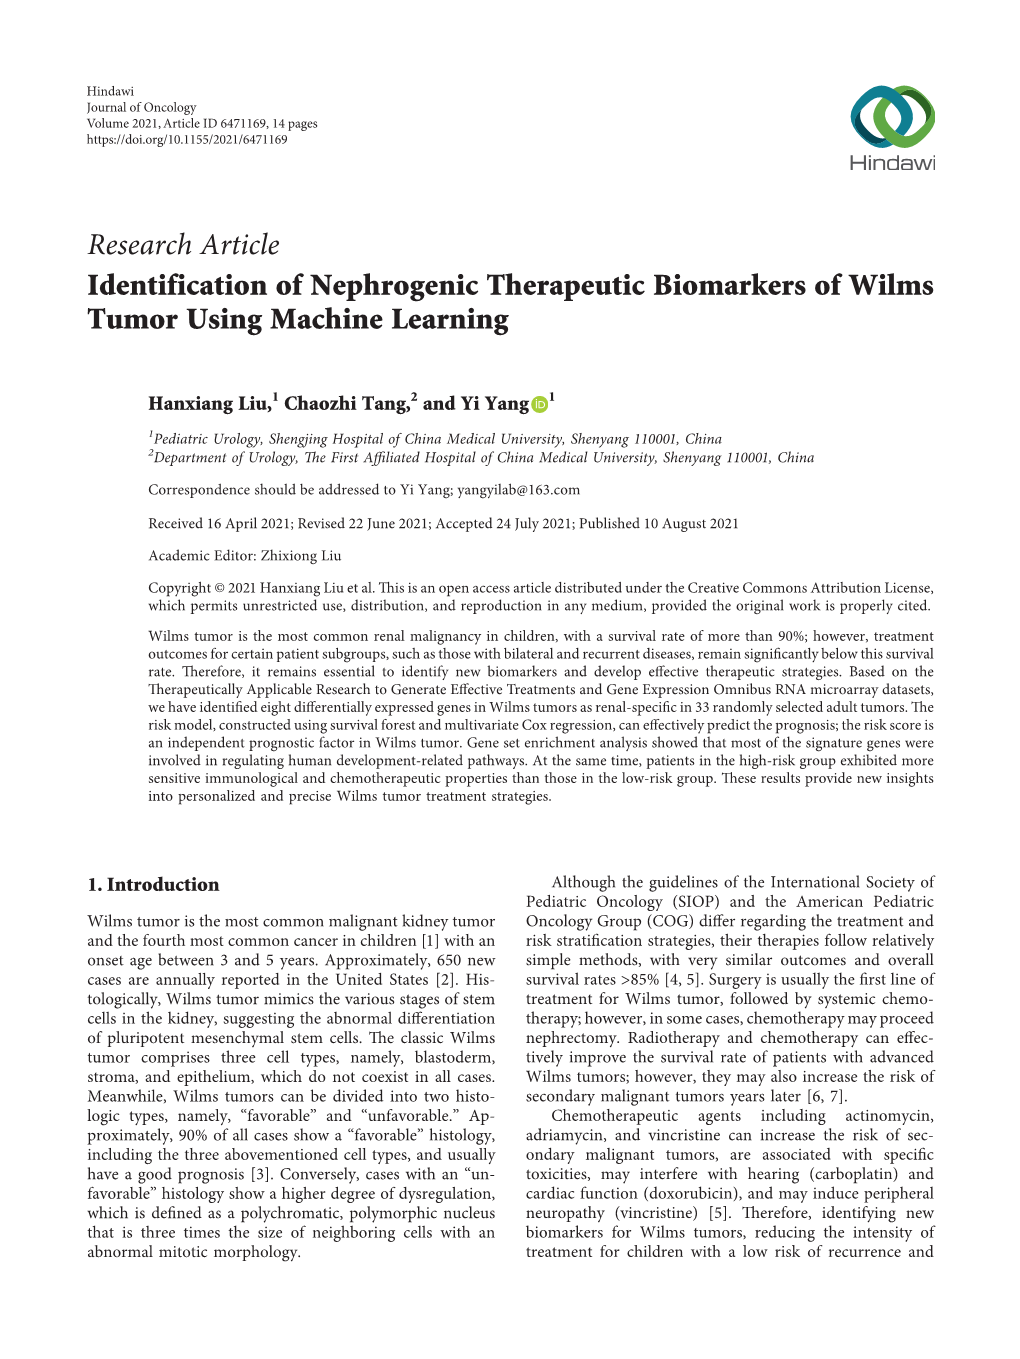 Identification of Nephrogenic Therapeutic Biomarkers of Wilms Tumor Using Machine Learning